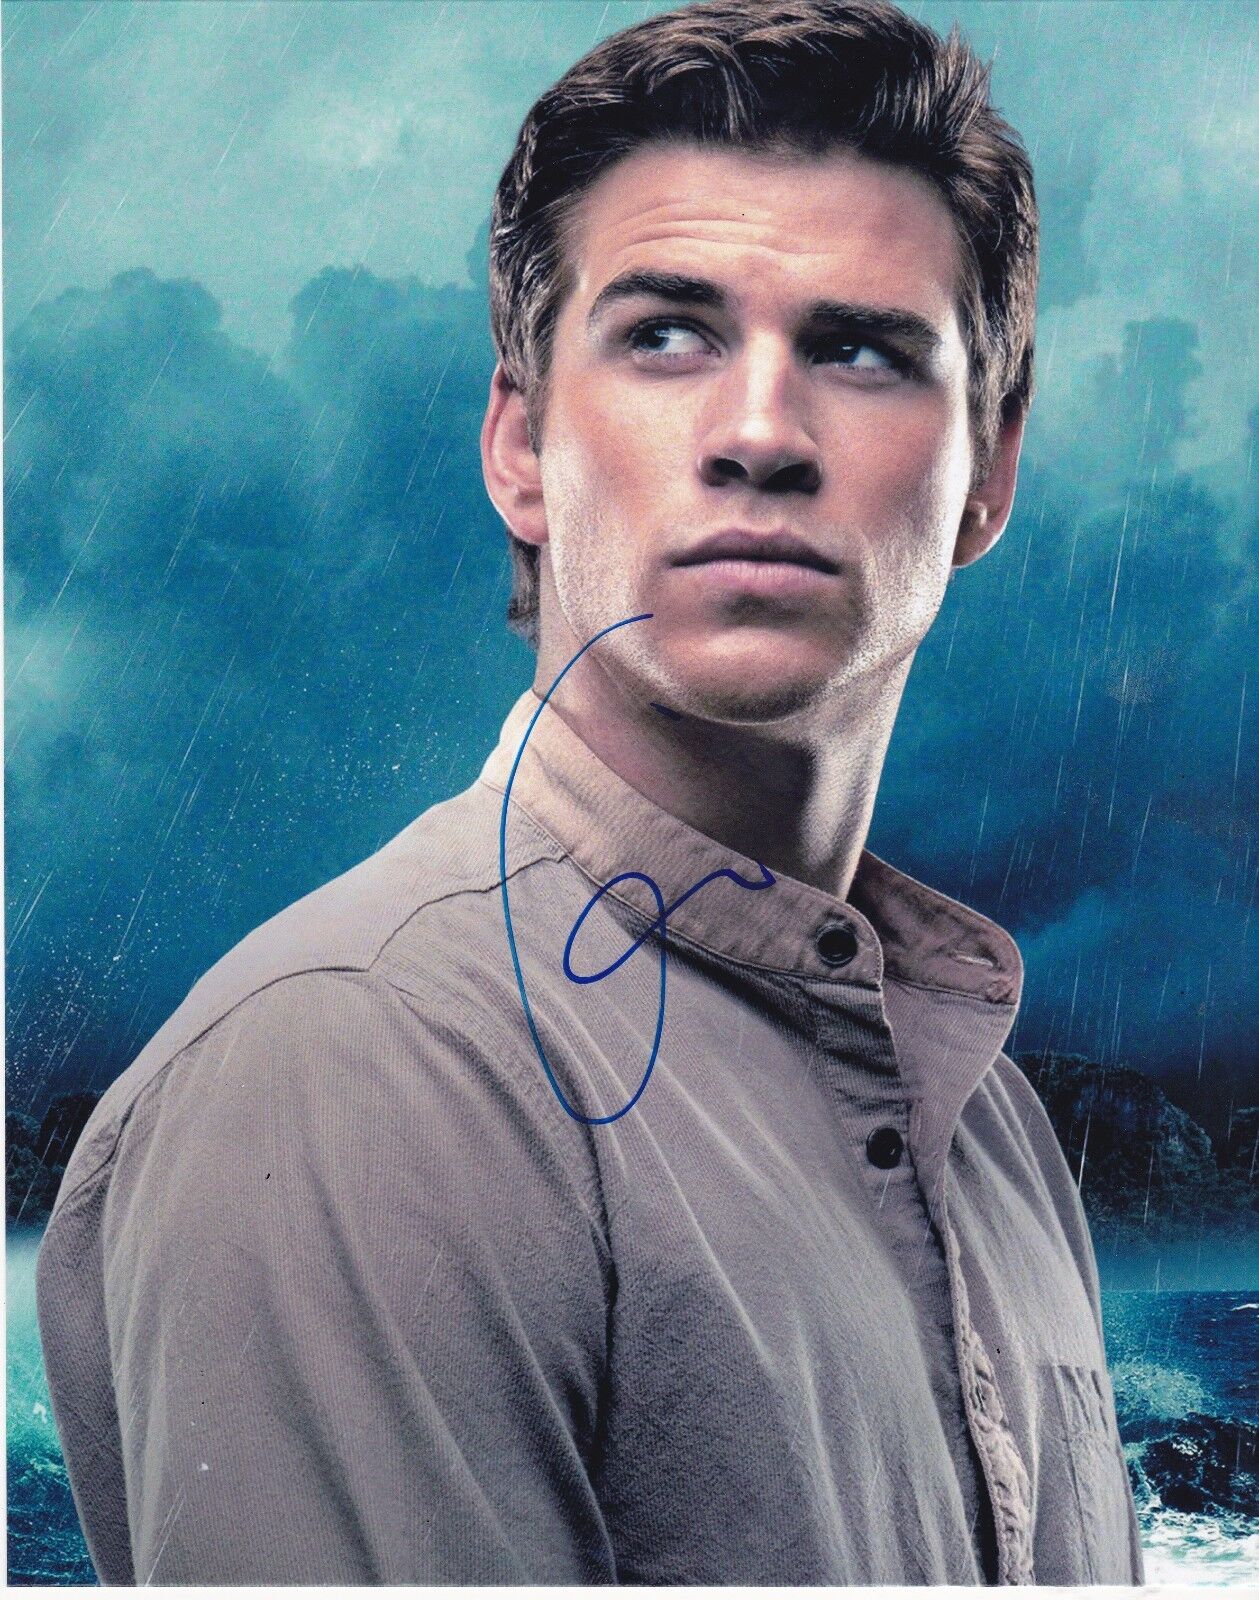 LIAM HEMSWORTH SIGNED 8X10 PHOTO AUTHENTIC AUTOGRAPH THE HUNGER GAMES COA A